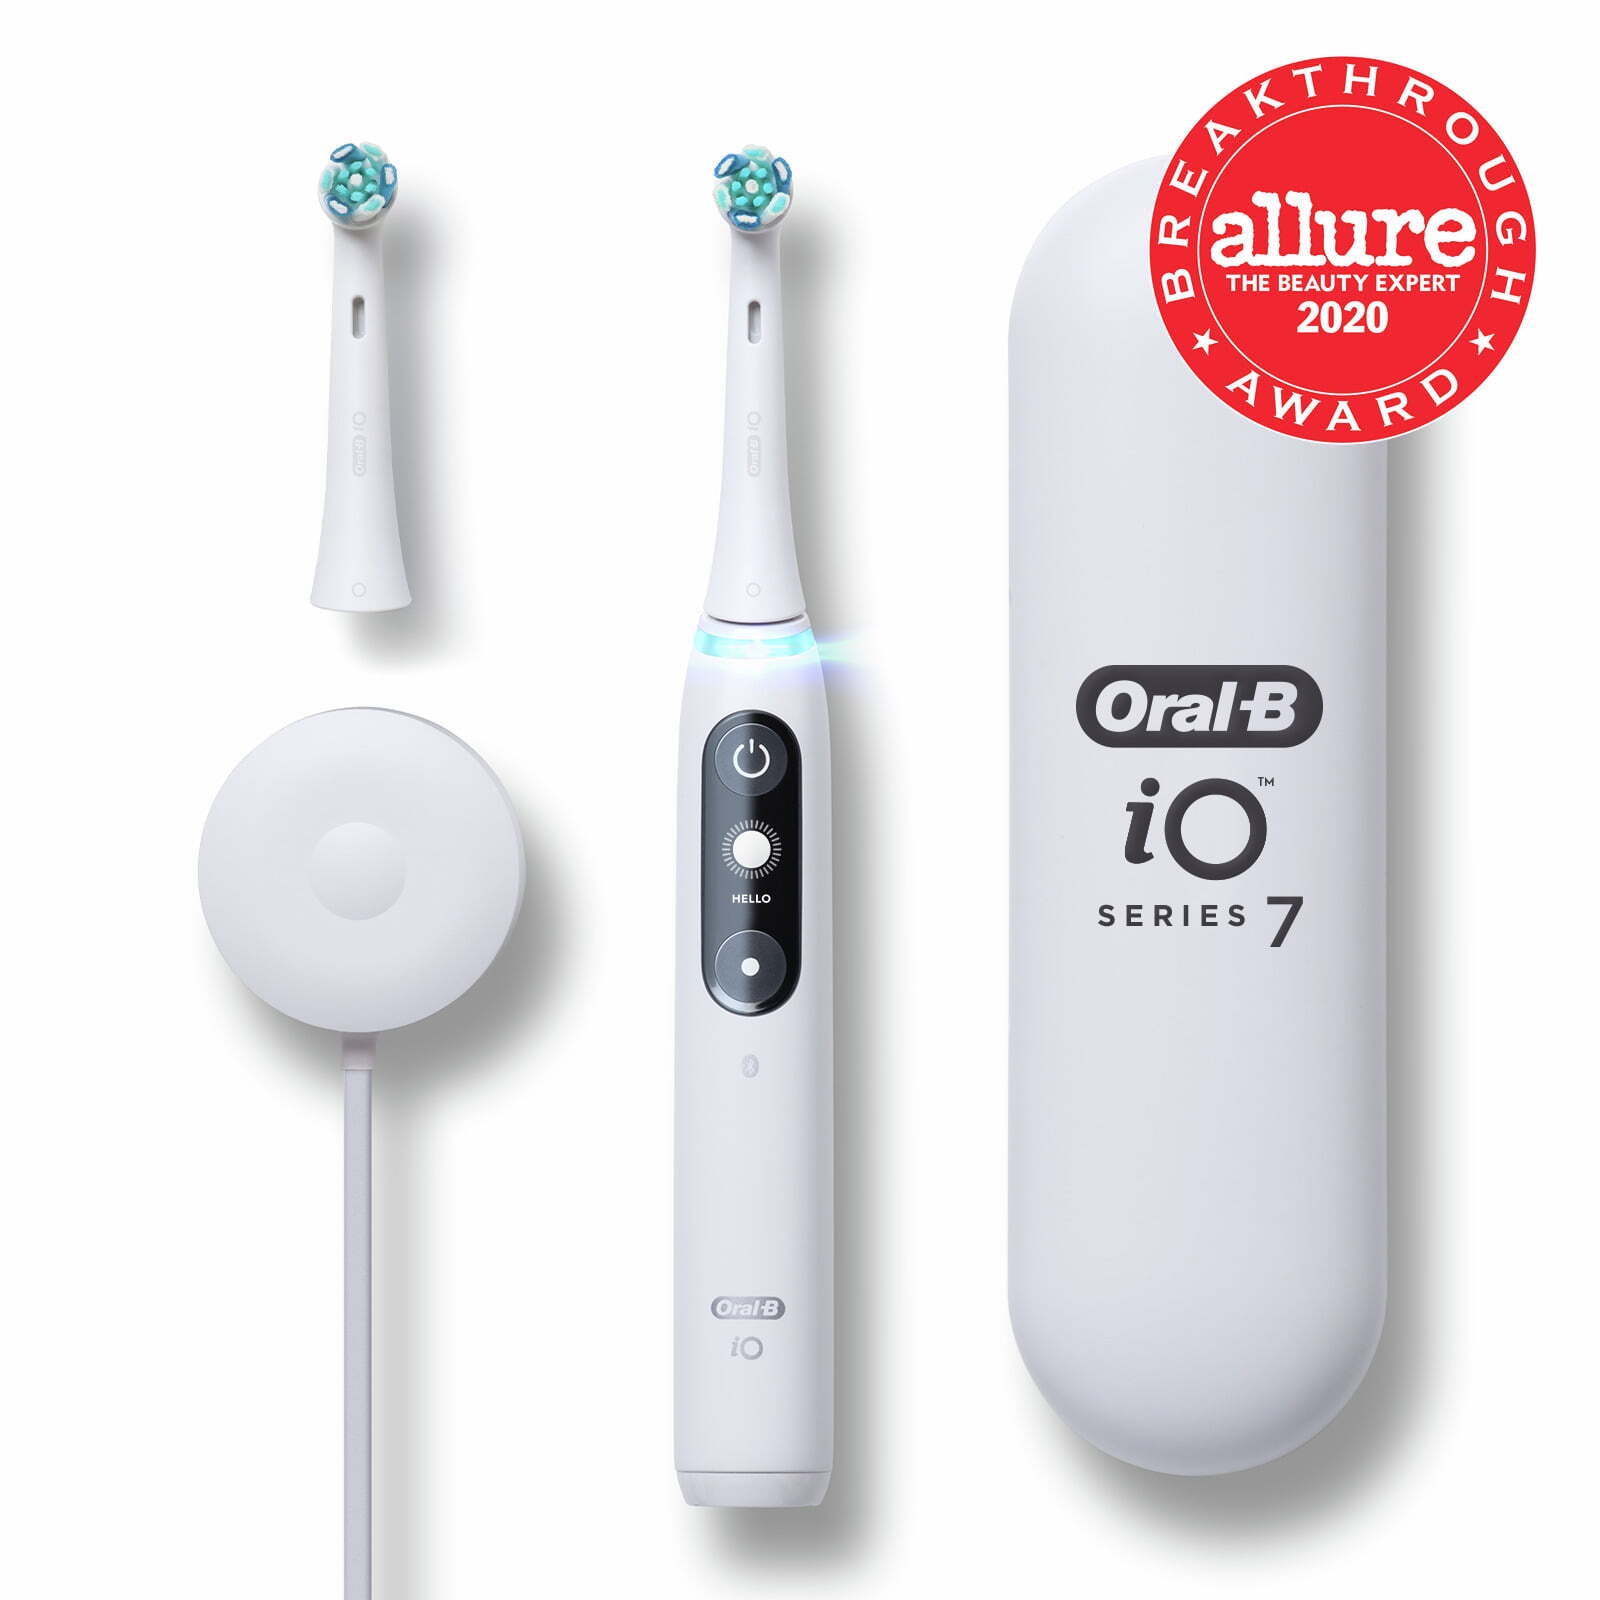 Oral-B iO Series 7 Electric Toothbrush, 2 Brush Heads, White Alabster, for Adults and Children 3+ - image 1 of 16